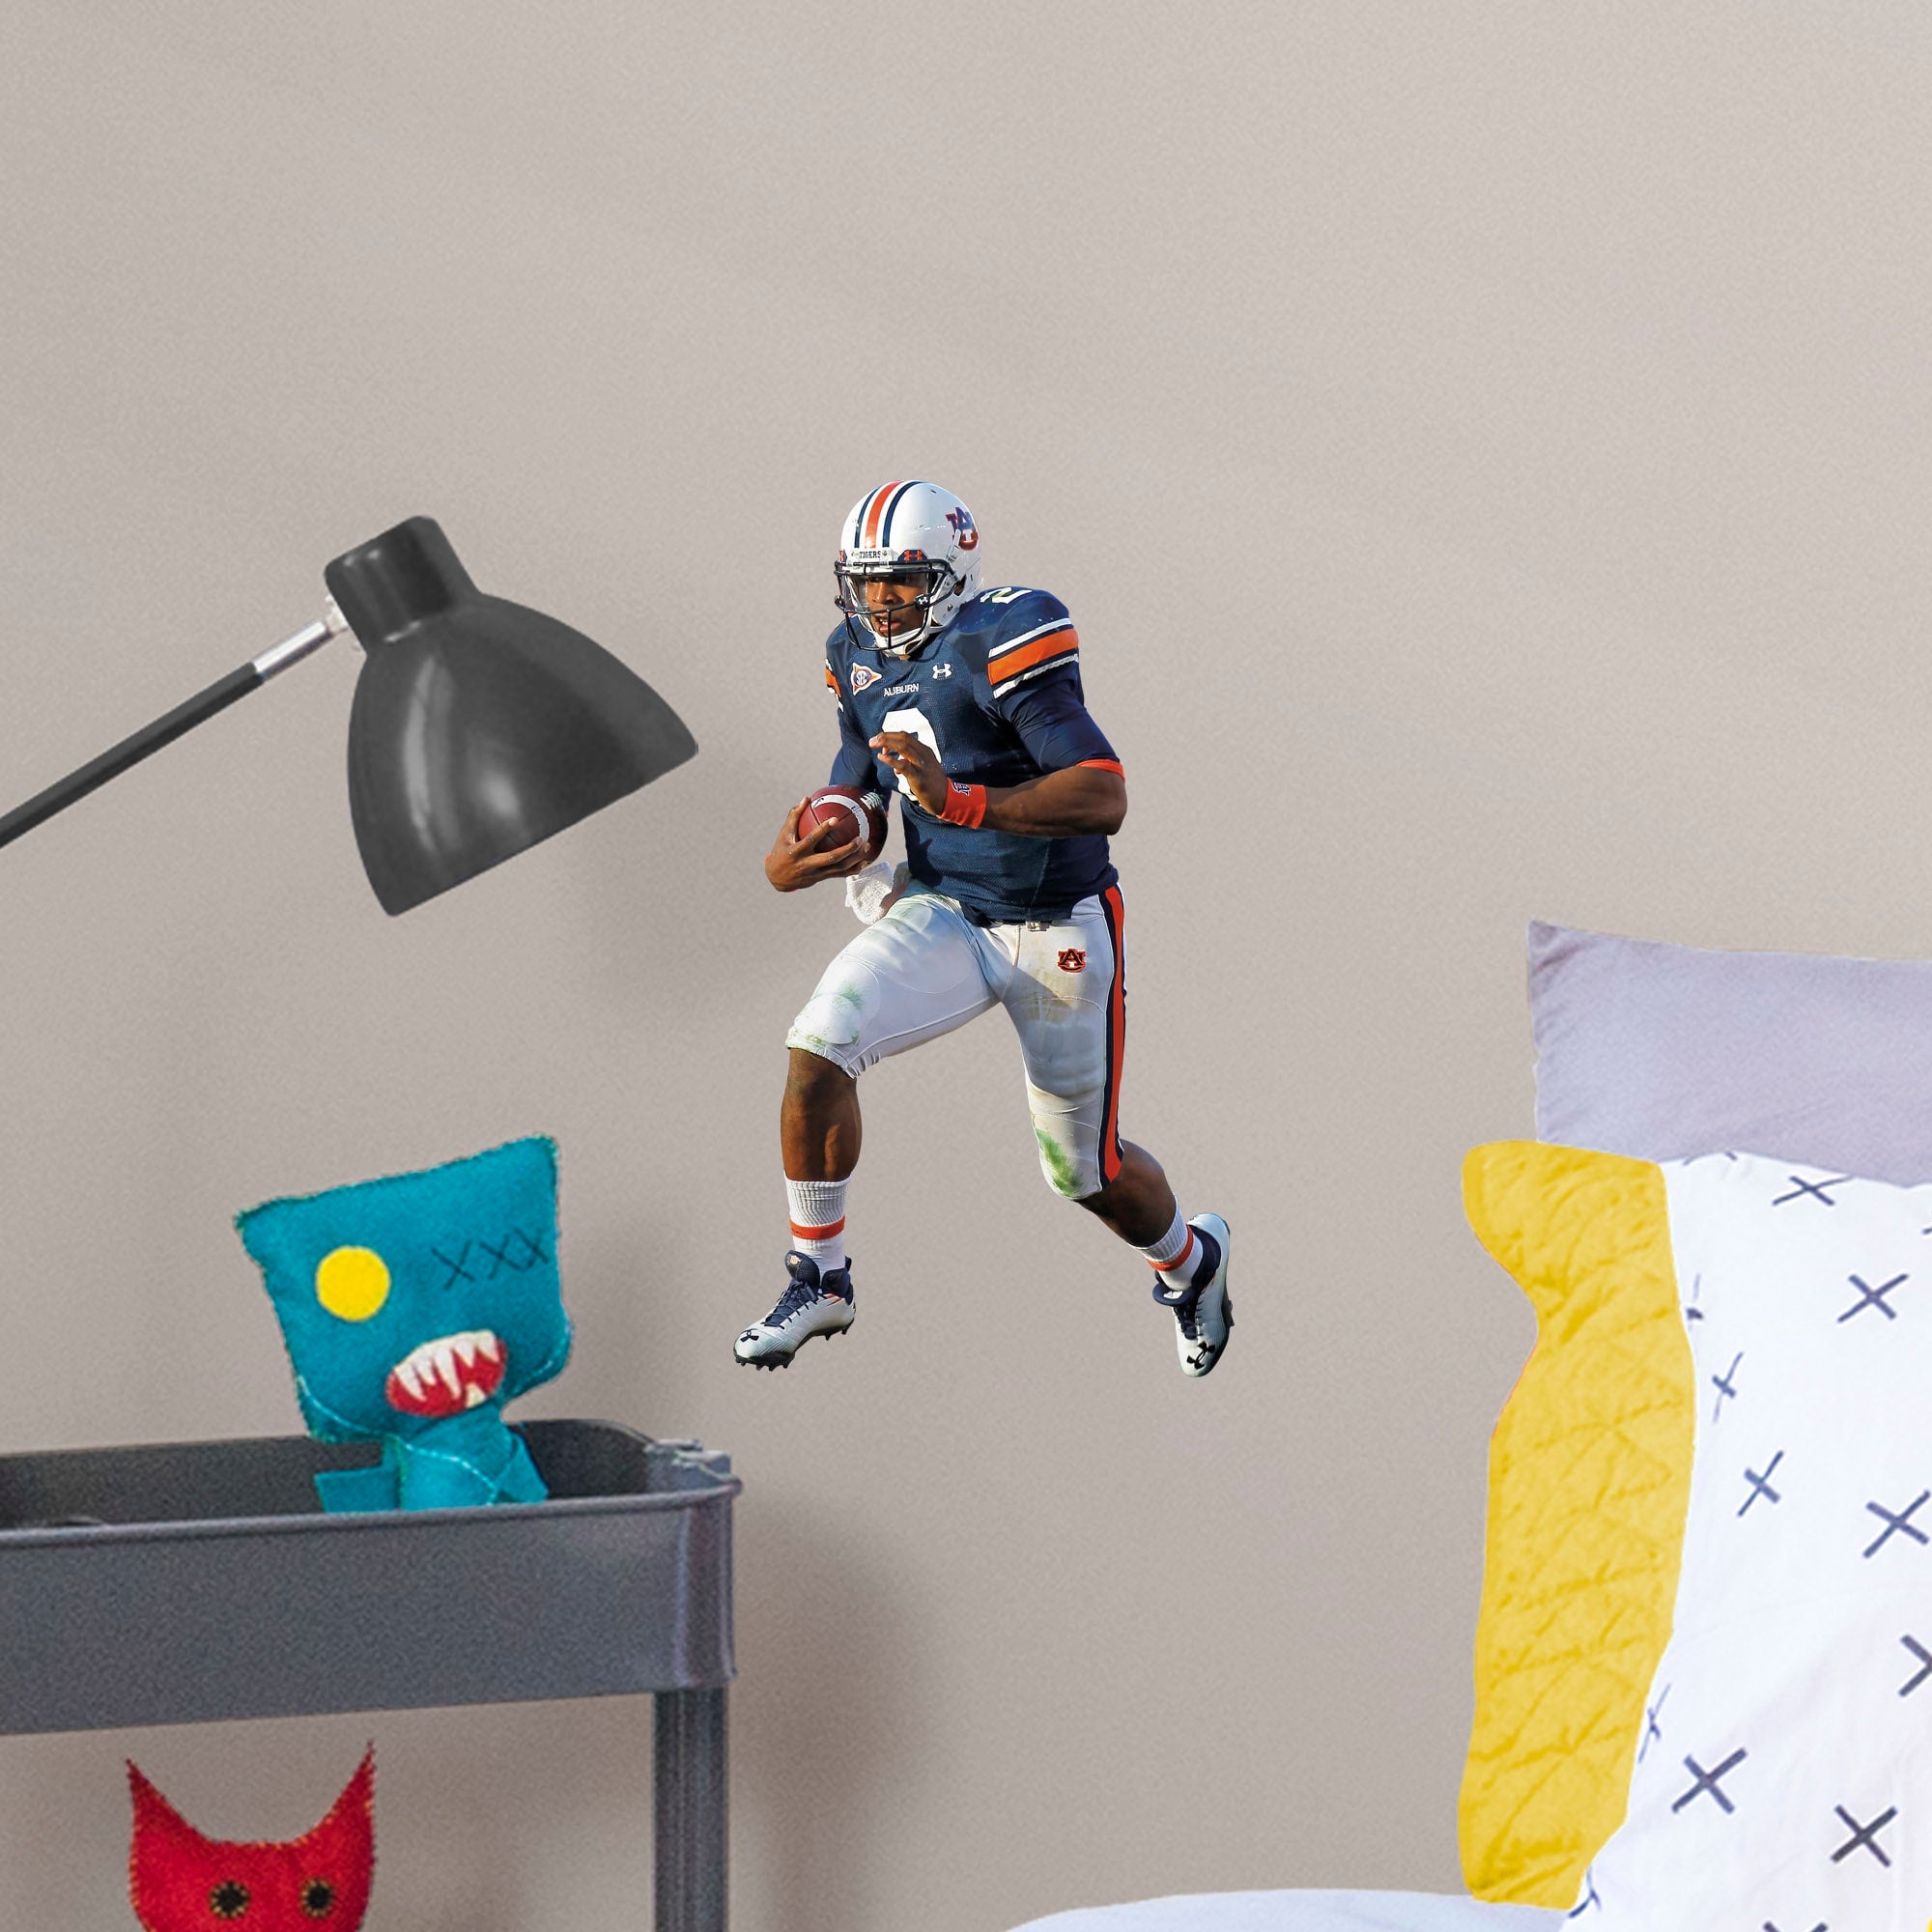 Cam Newton for Auburn Tigers: Auburn - Officially Licensed Removable Wall Decal Large by Fathead | Vinyl